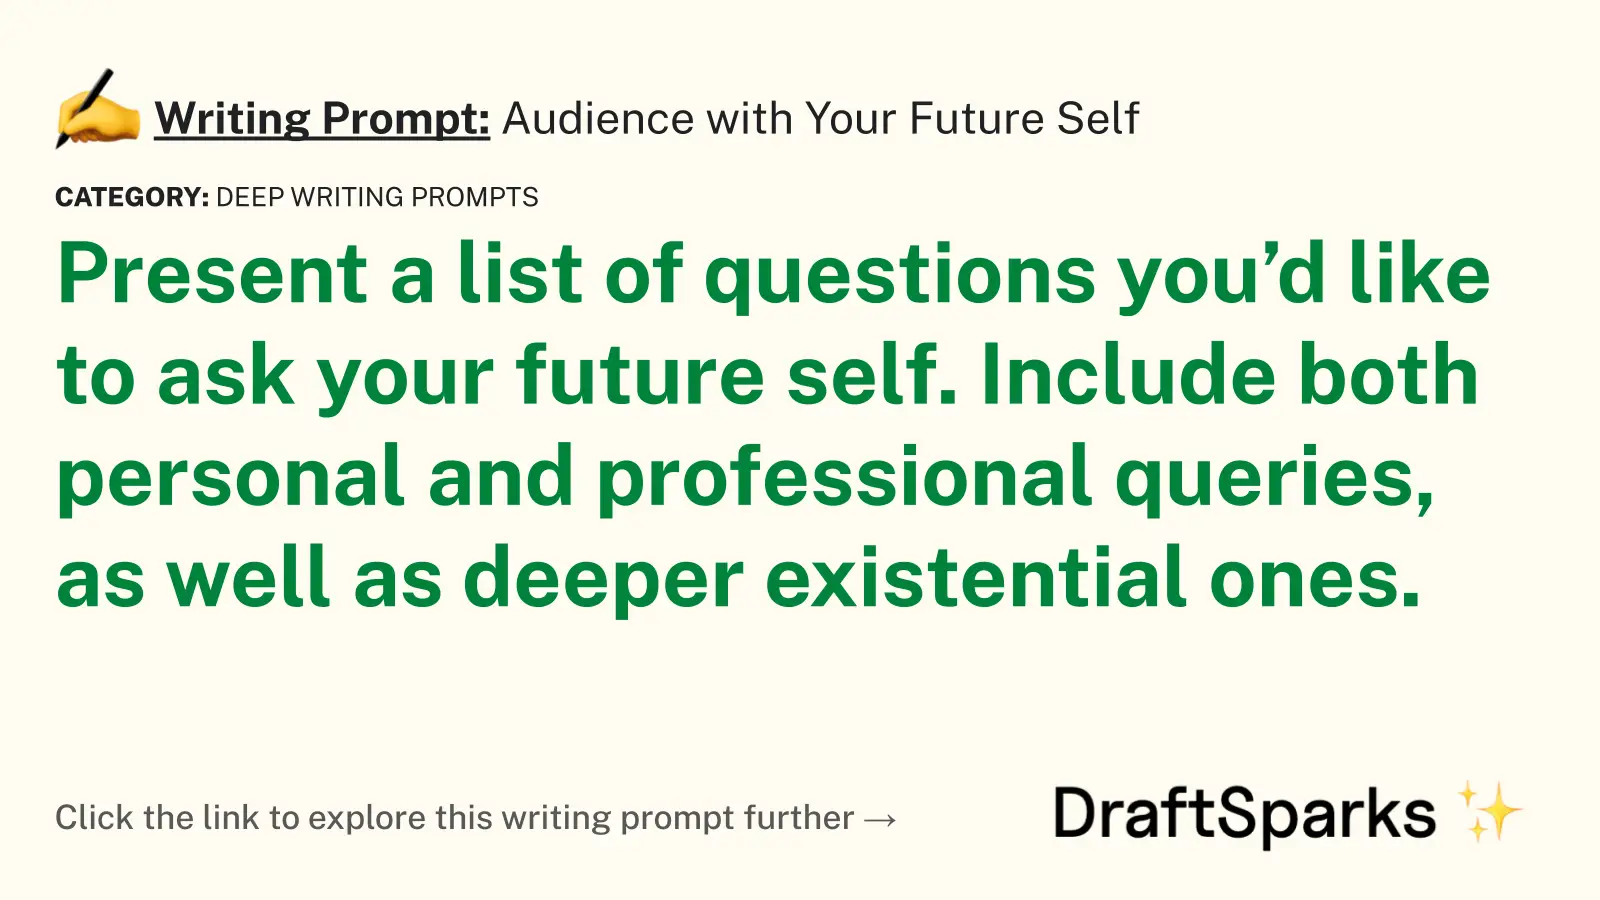 Audience with Your Future Self